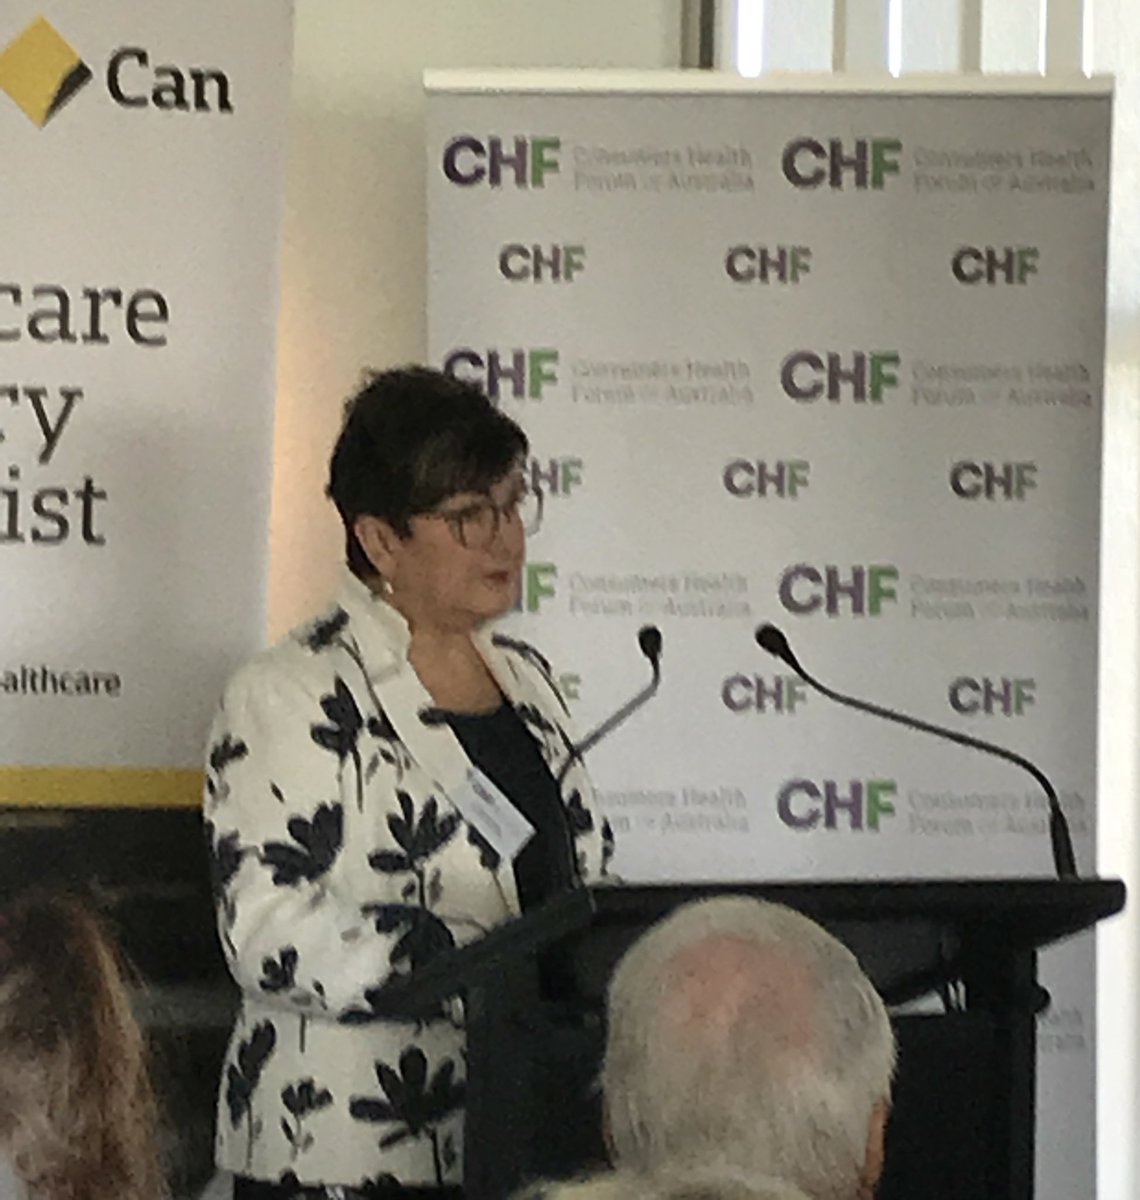 @CHFofAustralia CEO Leanne Wells @LeanneWells63 Reflecting on 30 years of consumers influencing healthcare through CHF #consumerhealth #consumervoices